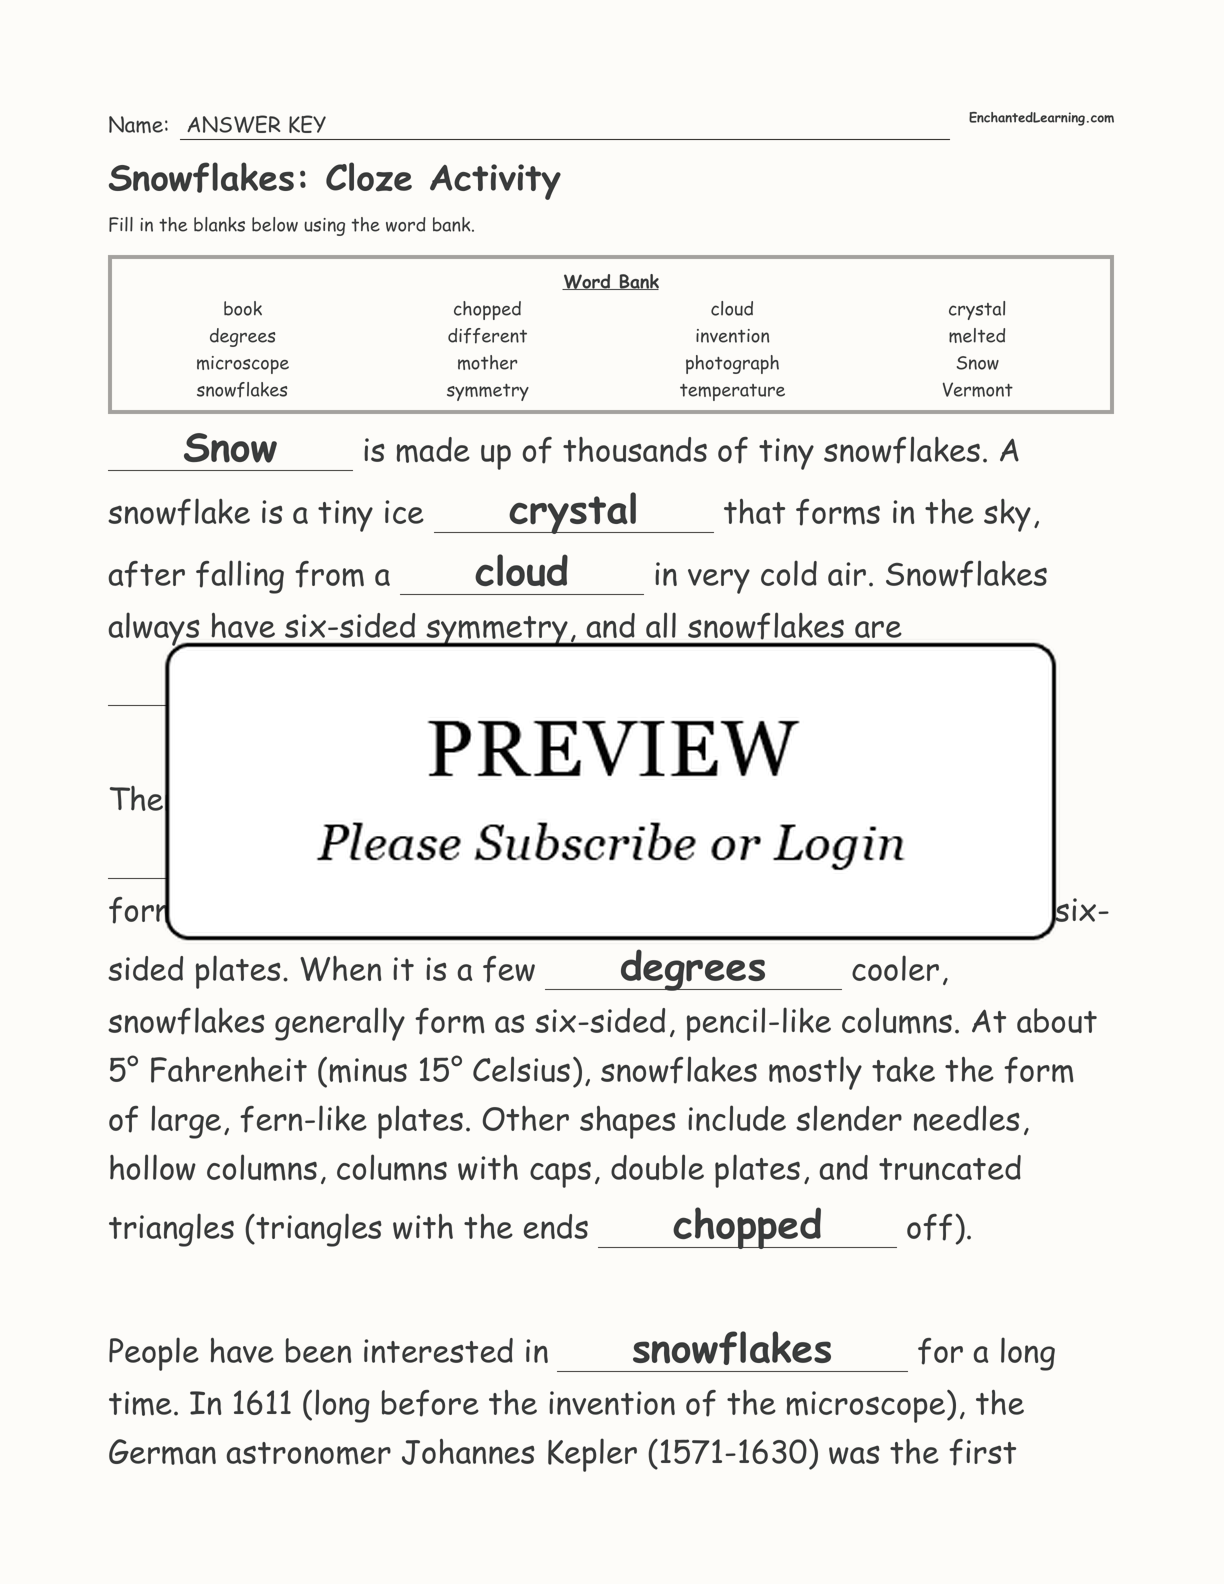 Snowflakes: Cloze Activity interactive worksheet page 3